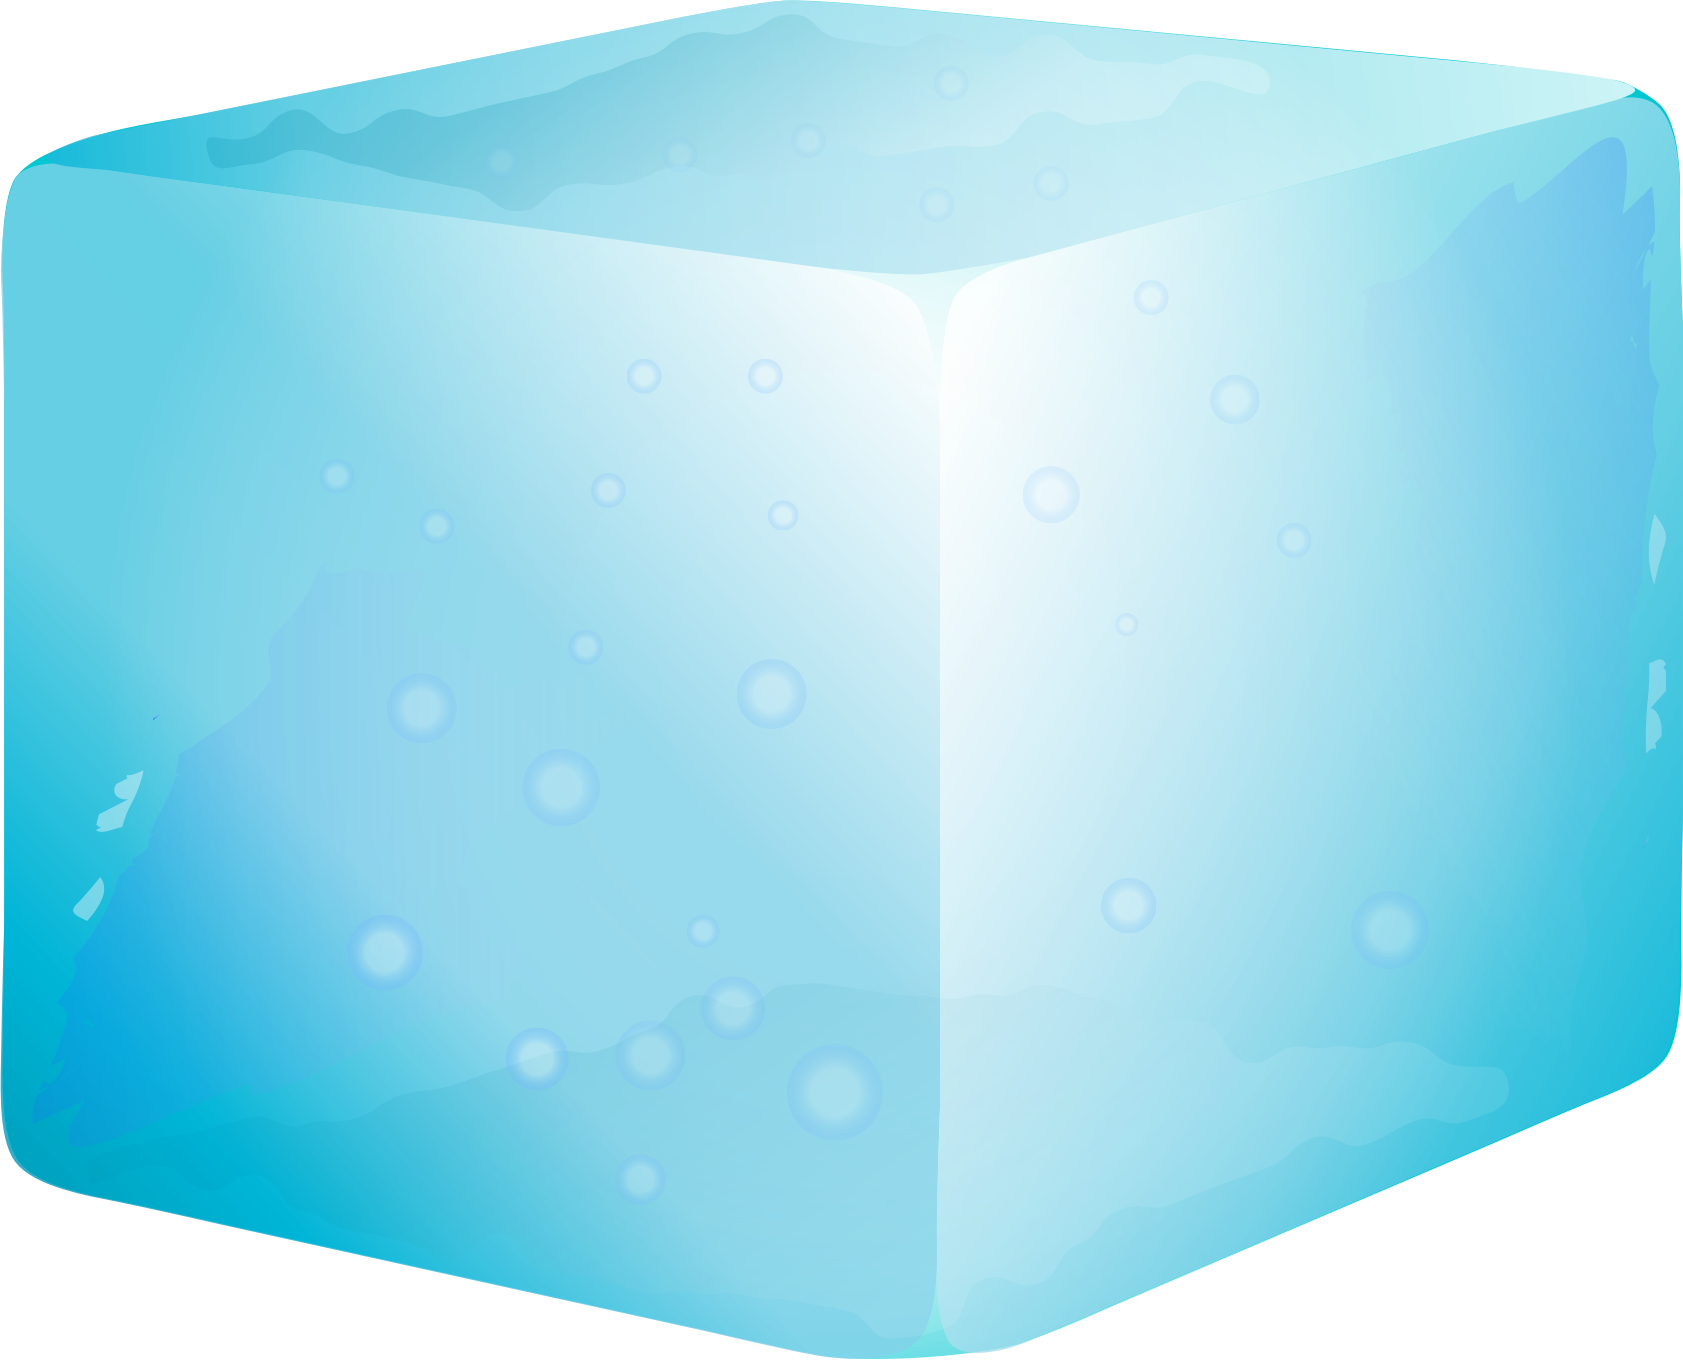 Clip Arts Related To : melting ice cubes clipart. view all Ice Cube ...